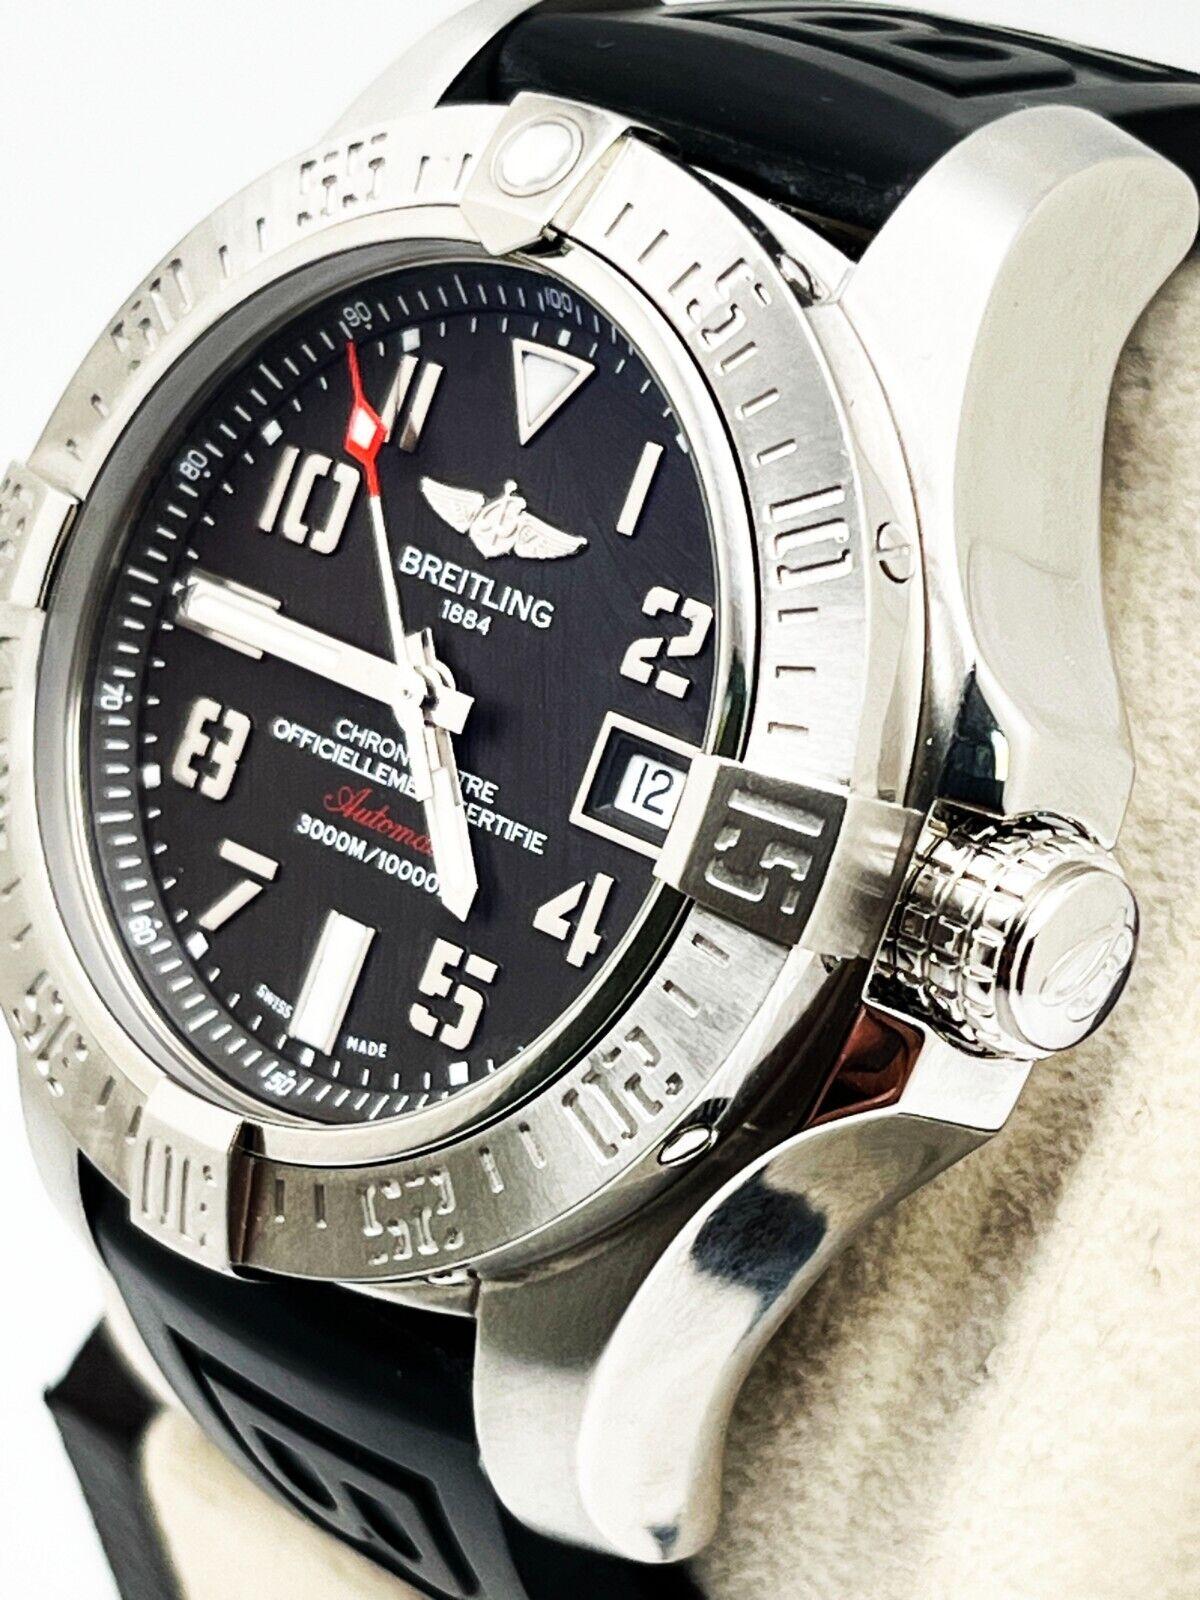 Breitling A17331 Avenger II Seawolf Stainless Steel Rubber Strap In Excellent Condition For Sale In San Diego, CA